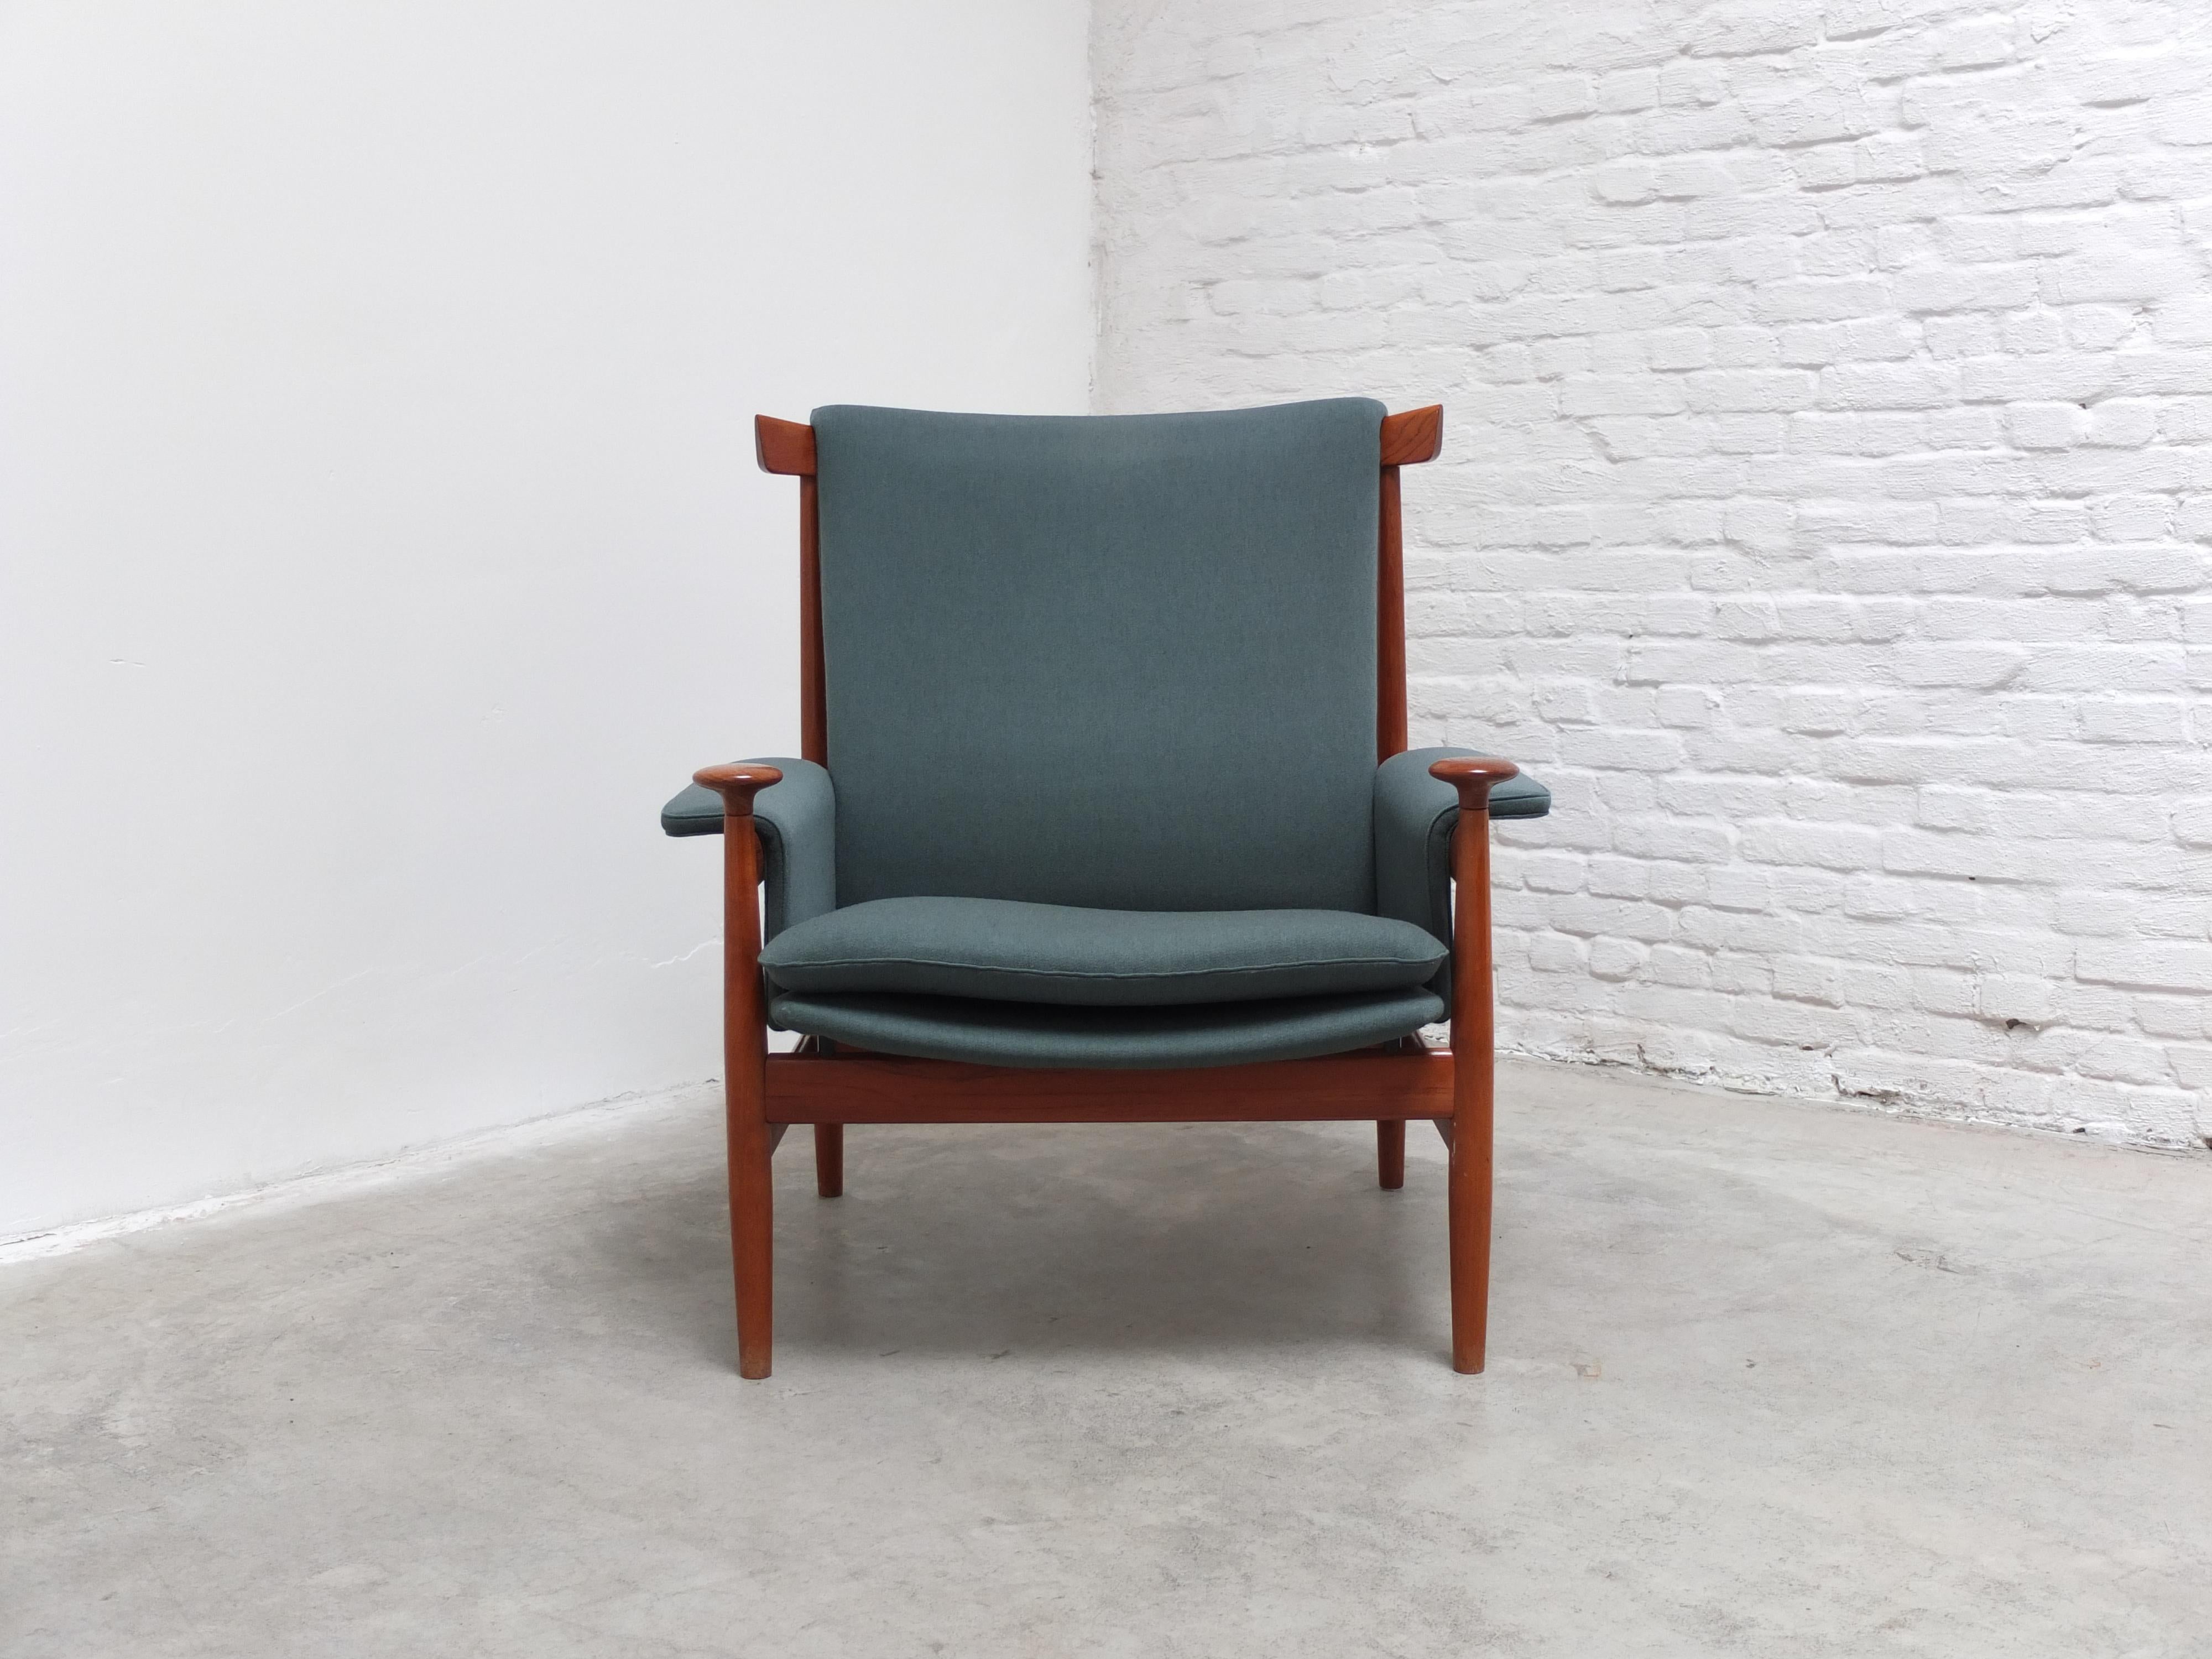 Rare ‘Bwana’ lounge chair designed by Finn Juhl in 1962. This is a very early production by France and Son in fully original condition. The frame is made of solid teak and has exceptional details such as the carved backrest and circular hand-rests.